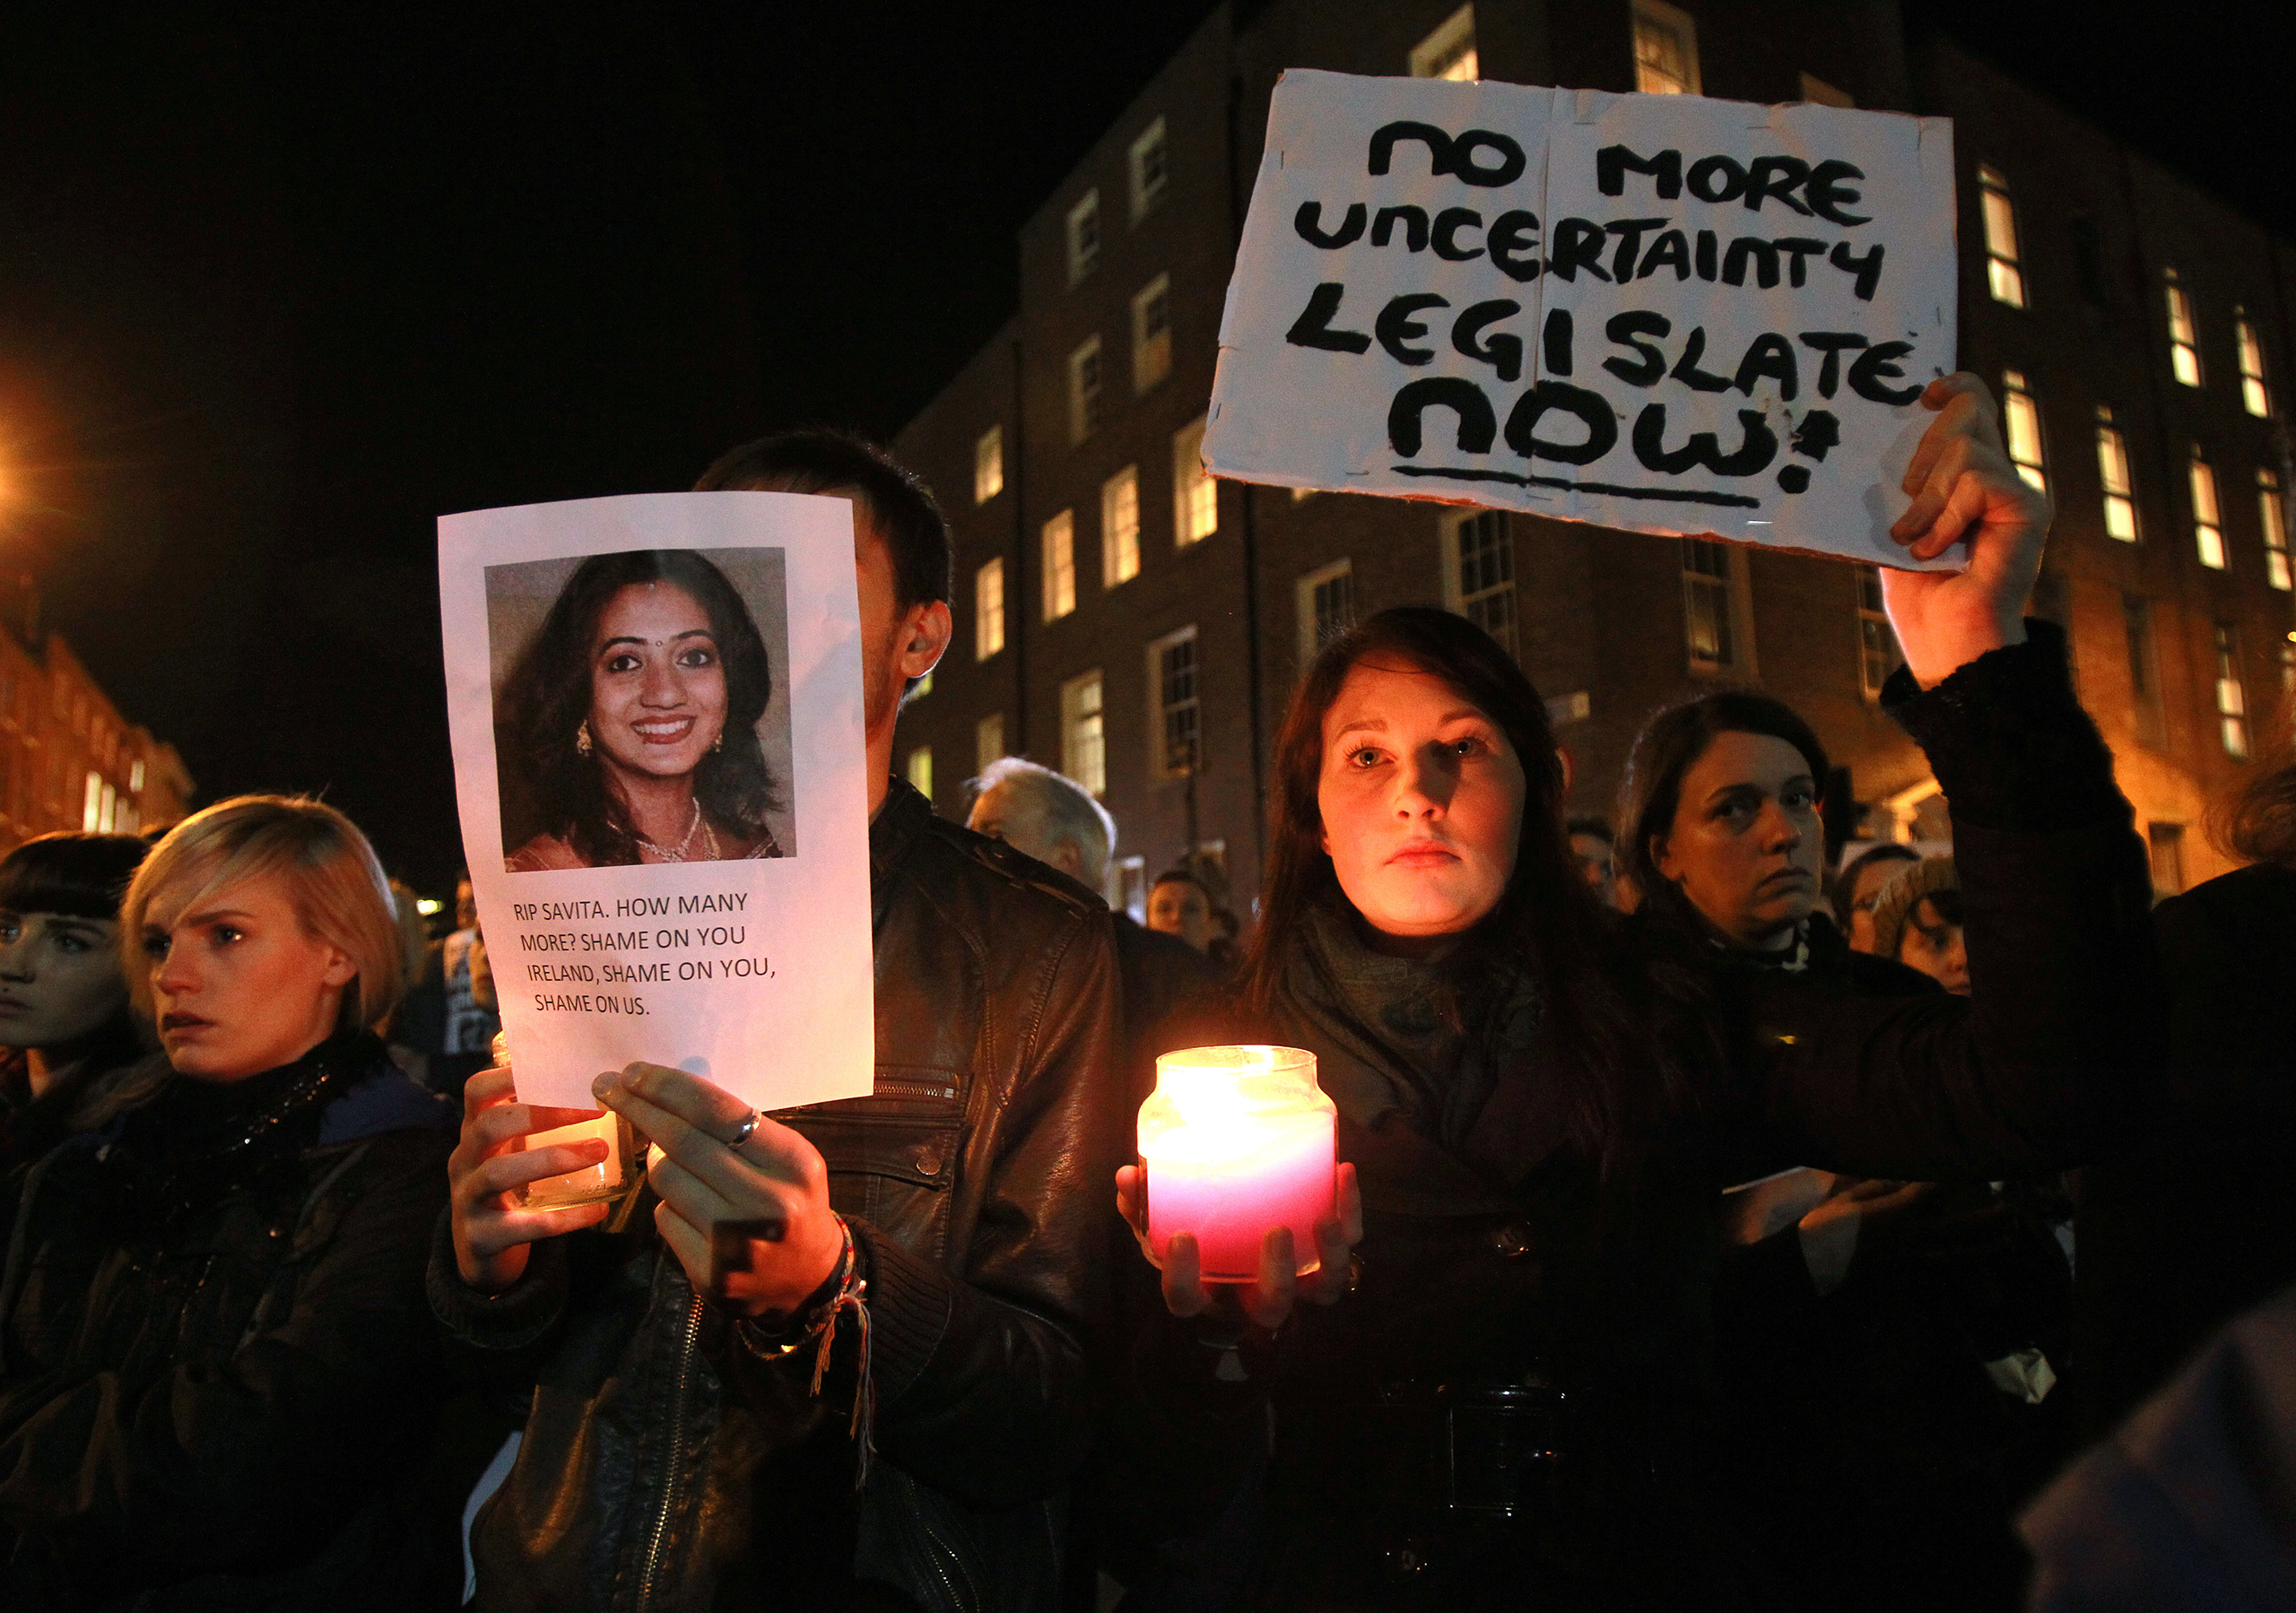 Protestors hold pictures of Savita Halappanavar, an Indian woman who was allegedly refused a pregnancy termination after doctors told her it was a Catholic country, as they gather outside the Parliament building during a demonstration in favor of abortion legislation in Dublin on Nov. 14, 2012. (Peter Muhly—AFP/Getty Images)